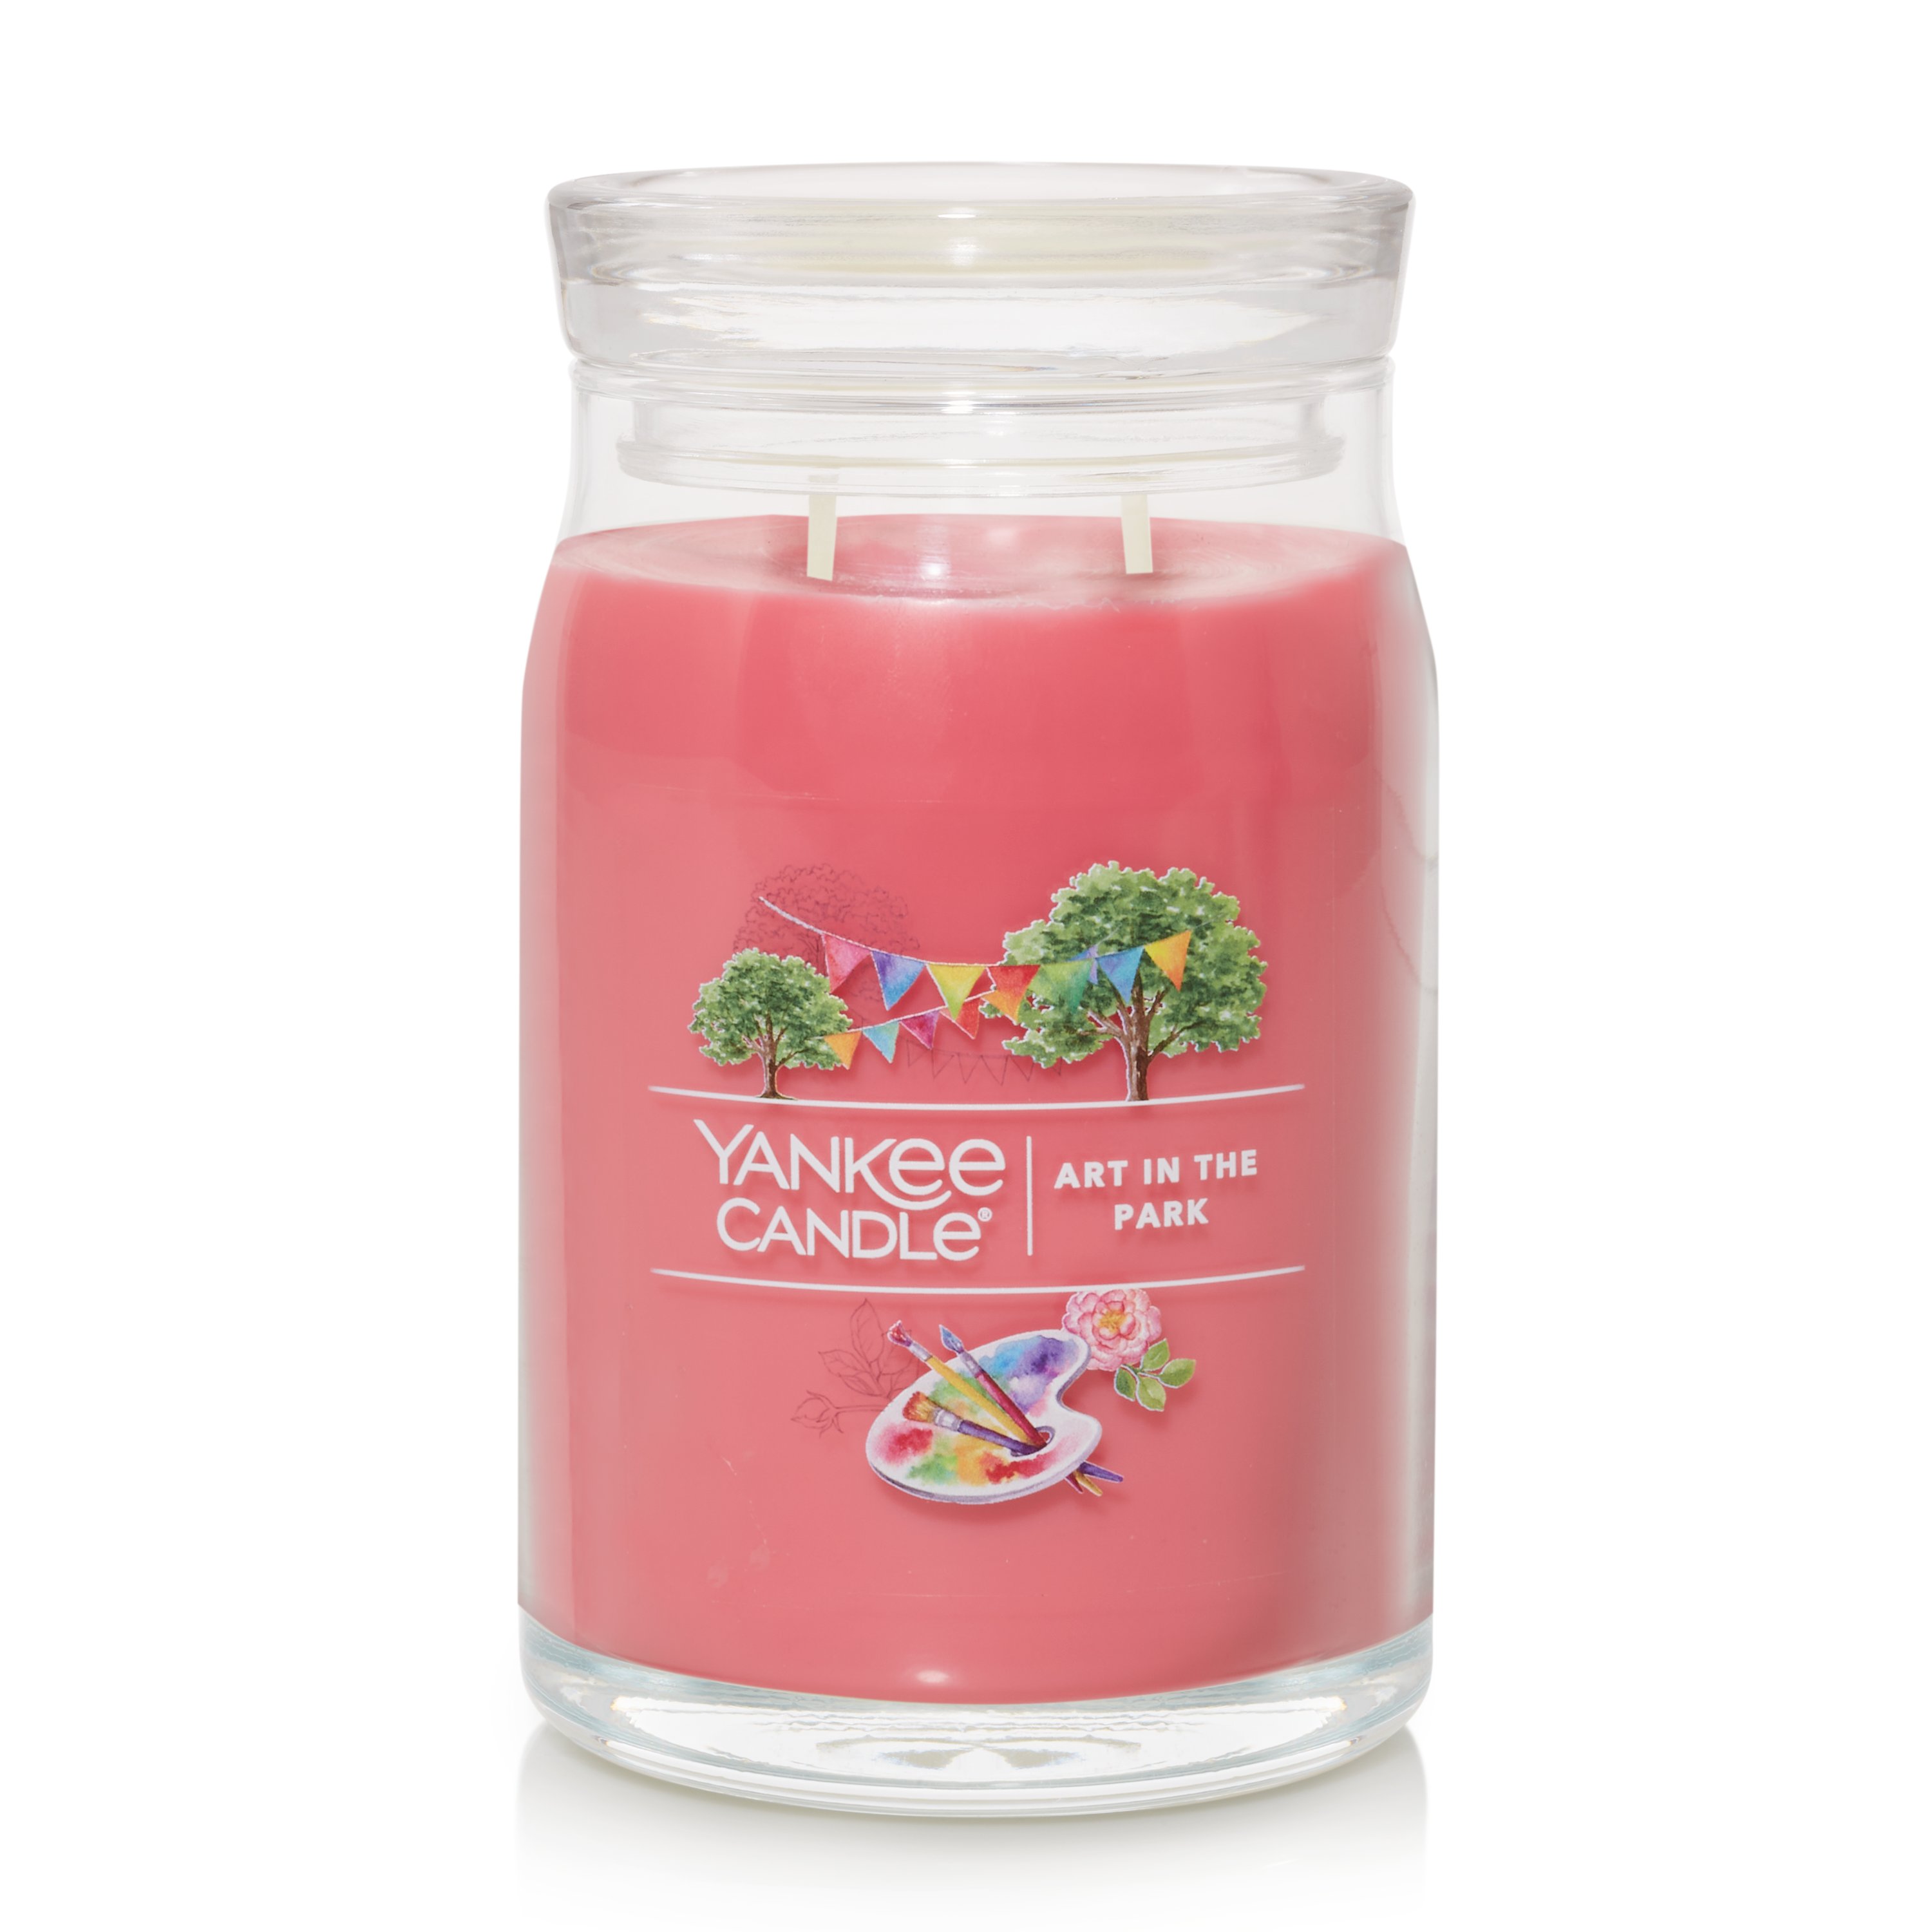 Yankee Candle Art in The Park 20-oz. Candle Jar